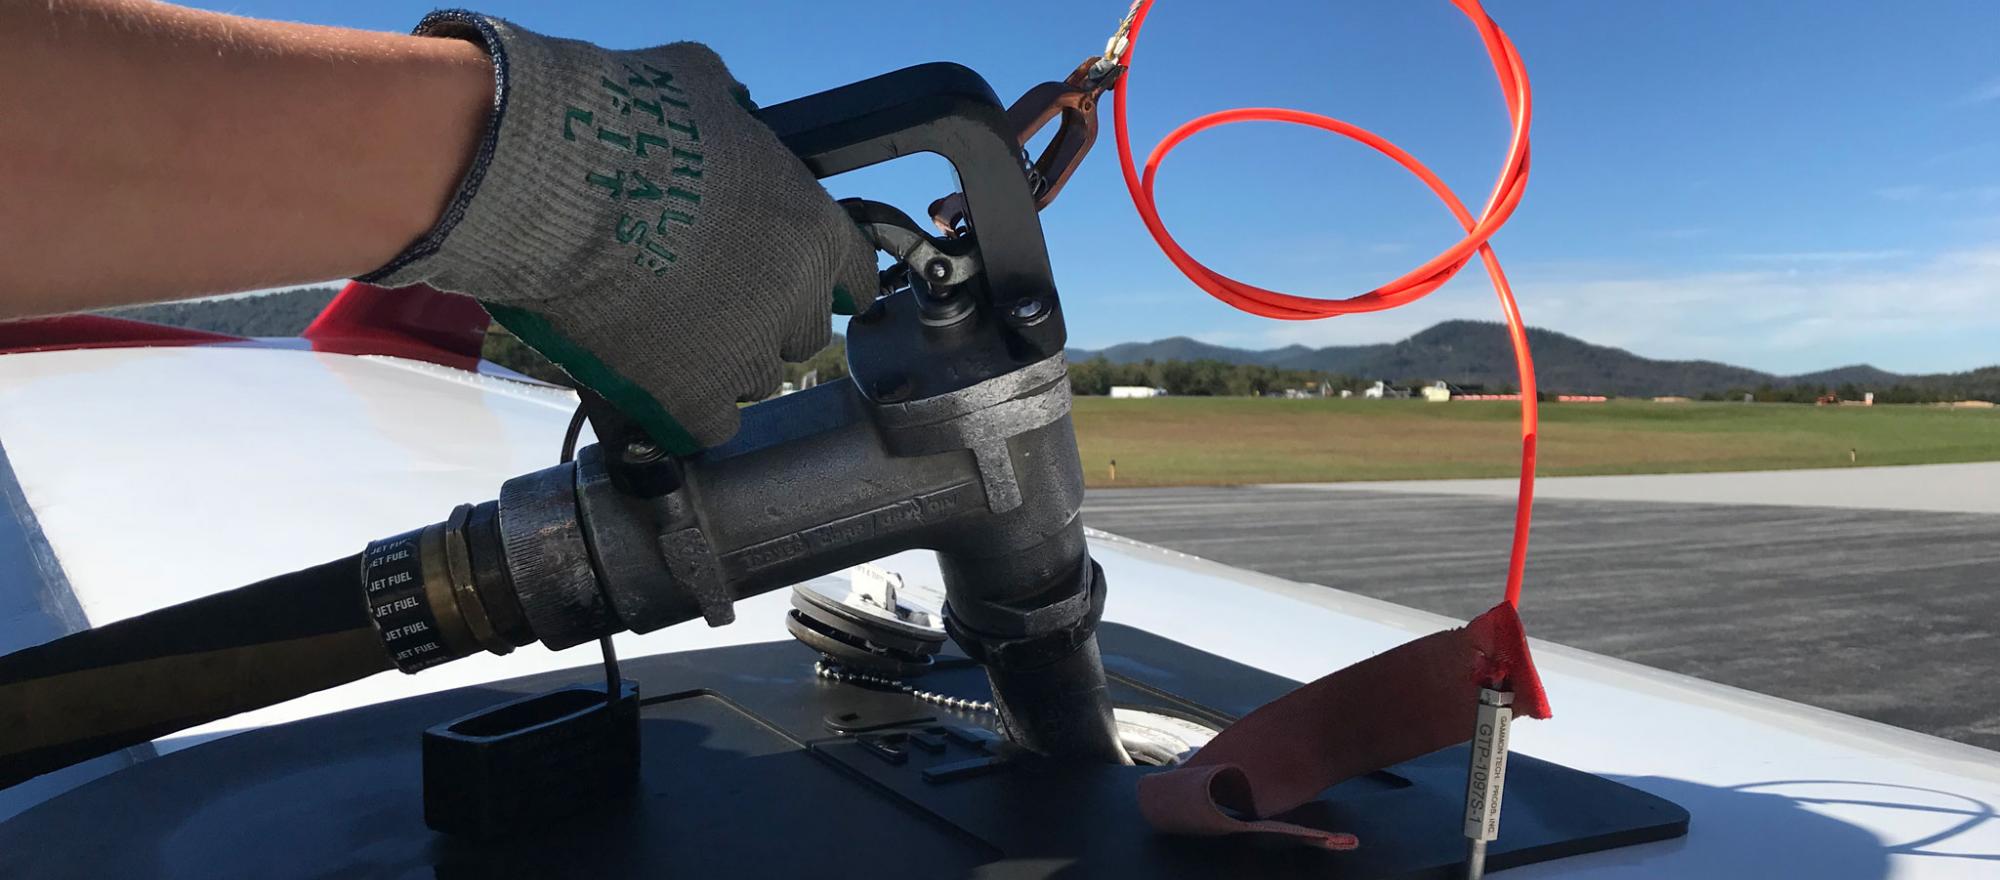 jet A fueling nozzle in overwing refueling port